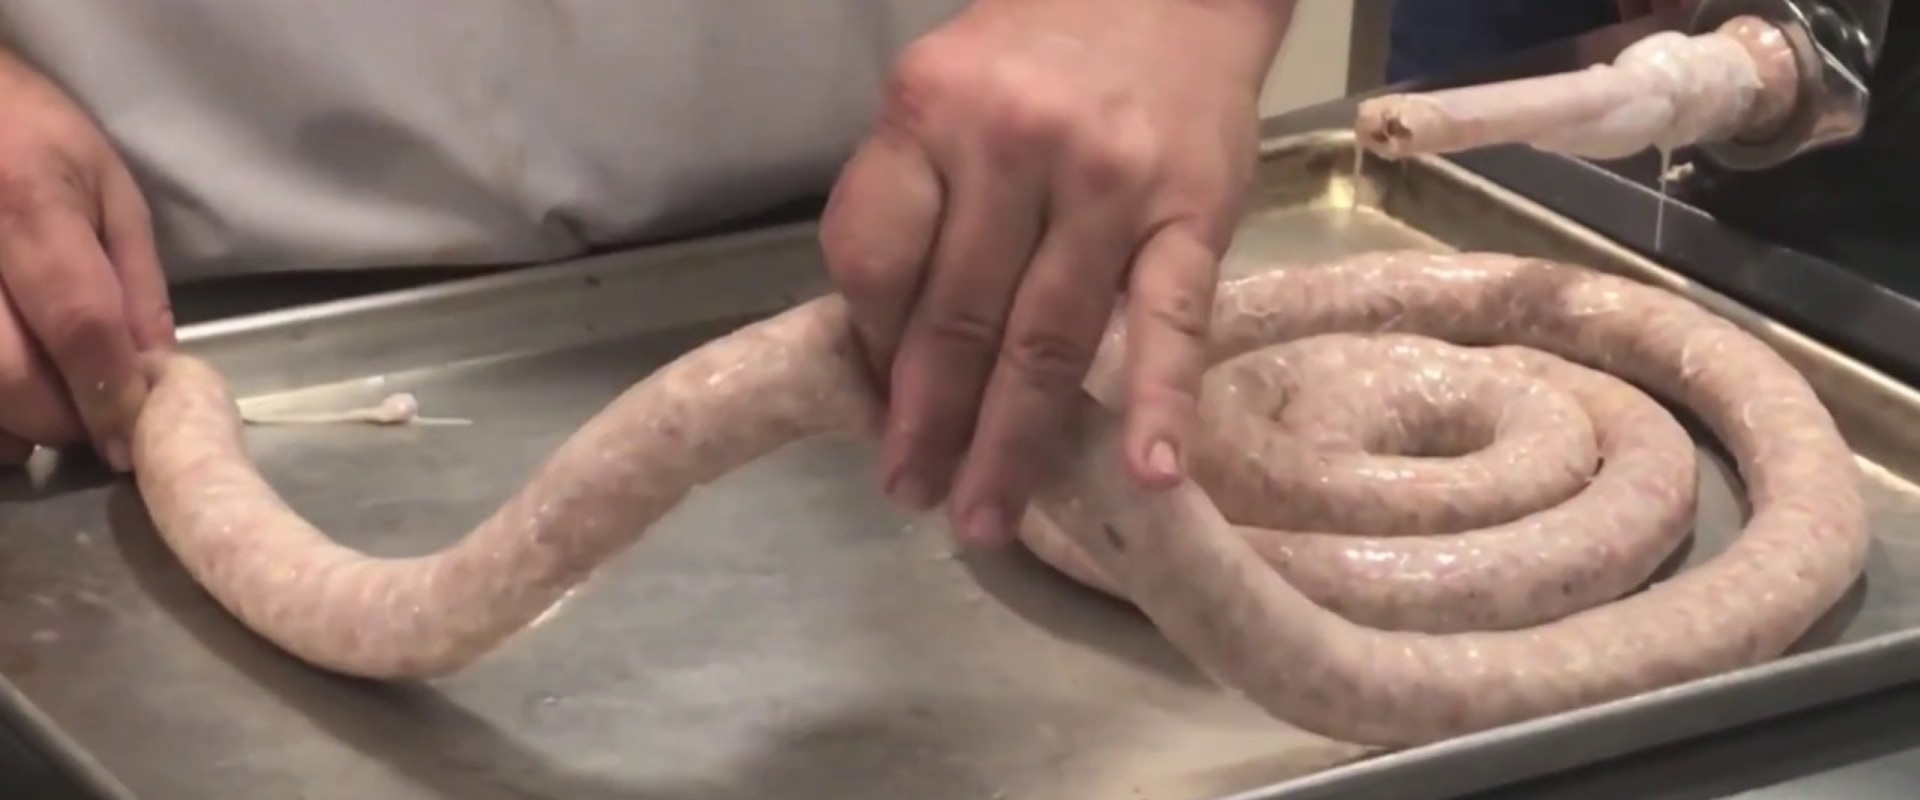 What is chicken sausage skin made of?